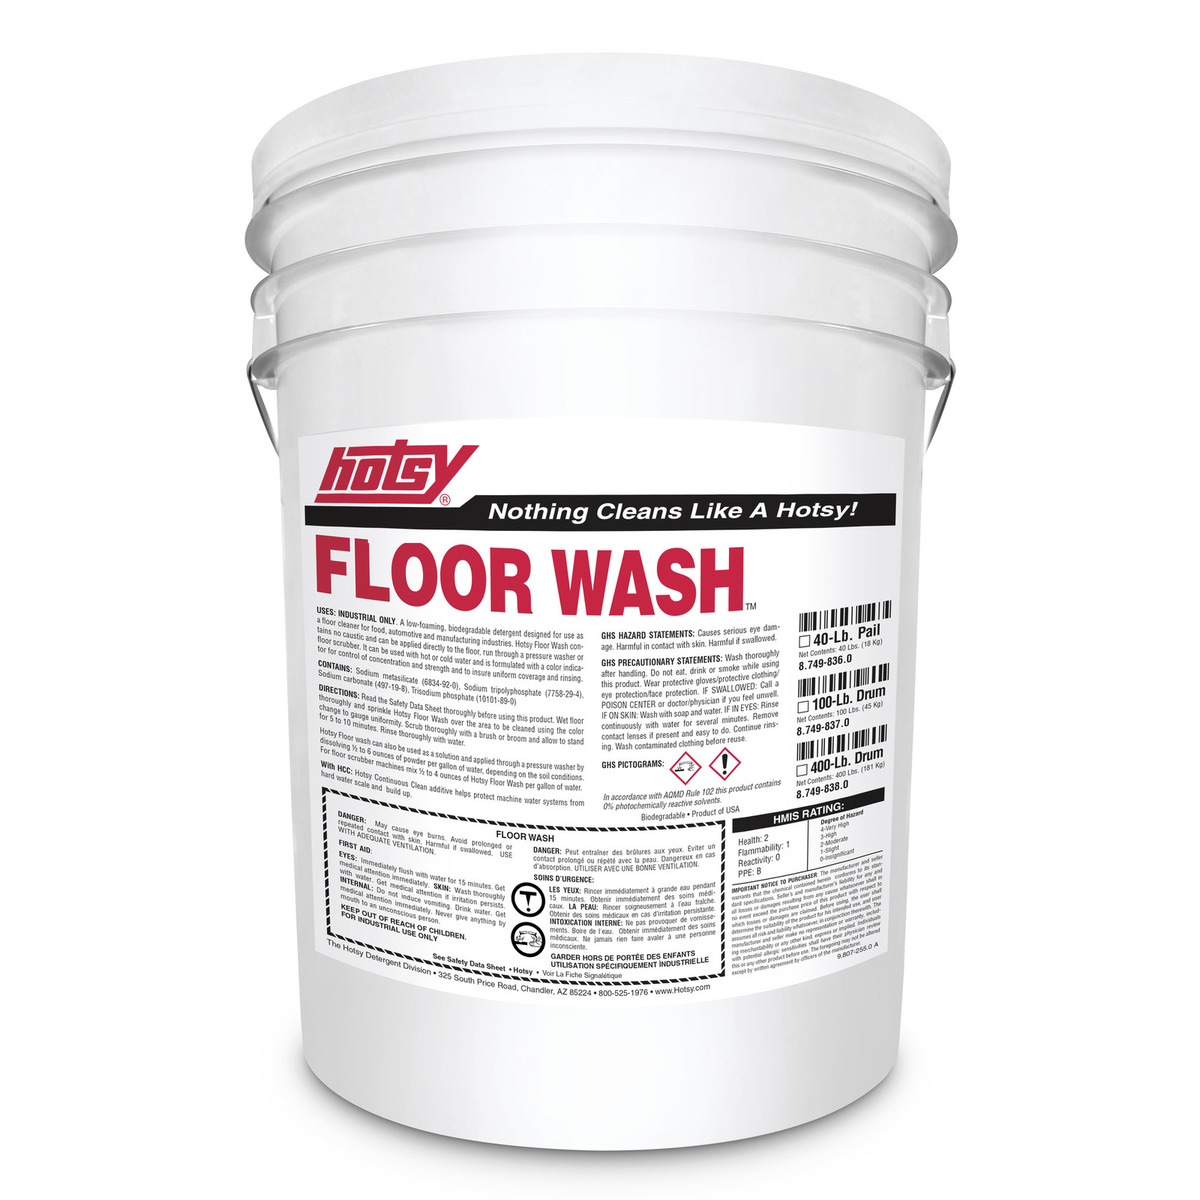 Floor Wash – Concentrated Biodegradable Detergent for Industrial Floor Cleaning